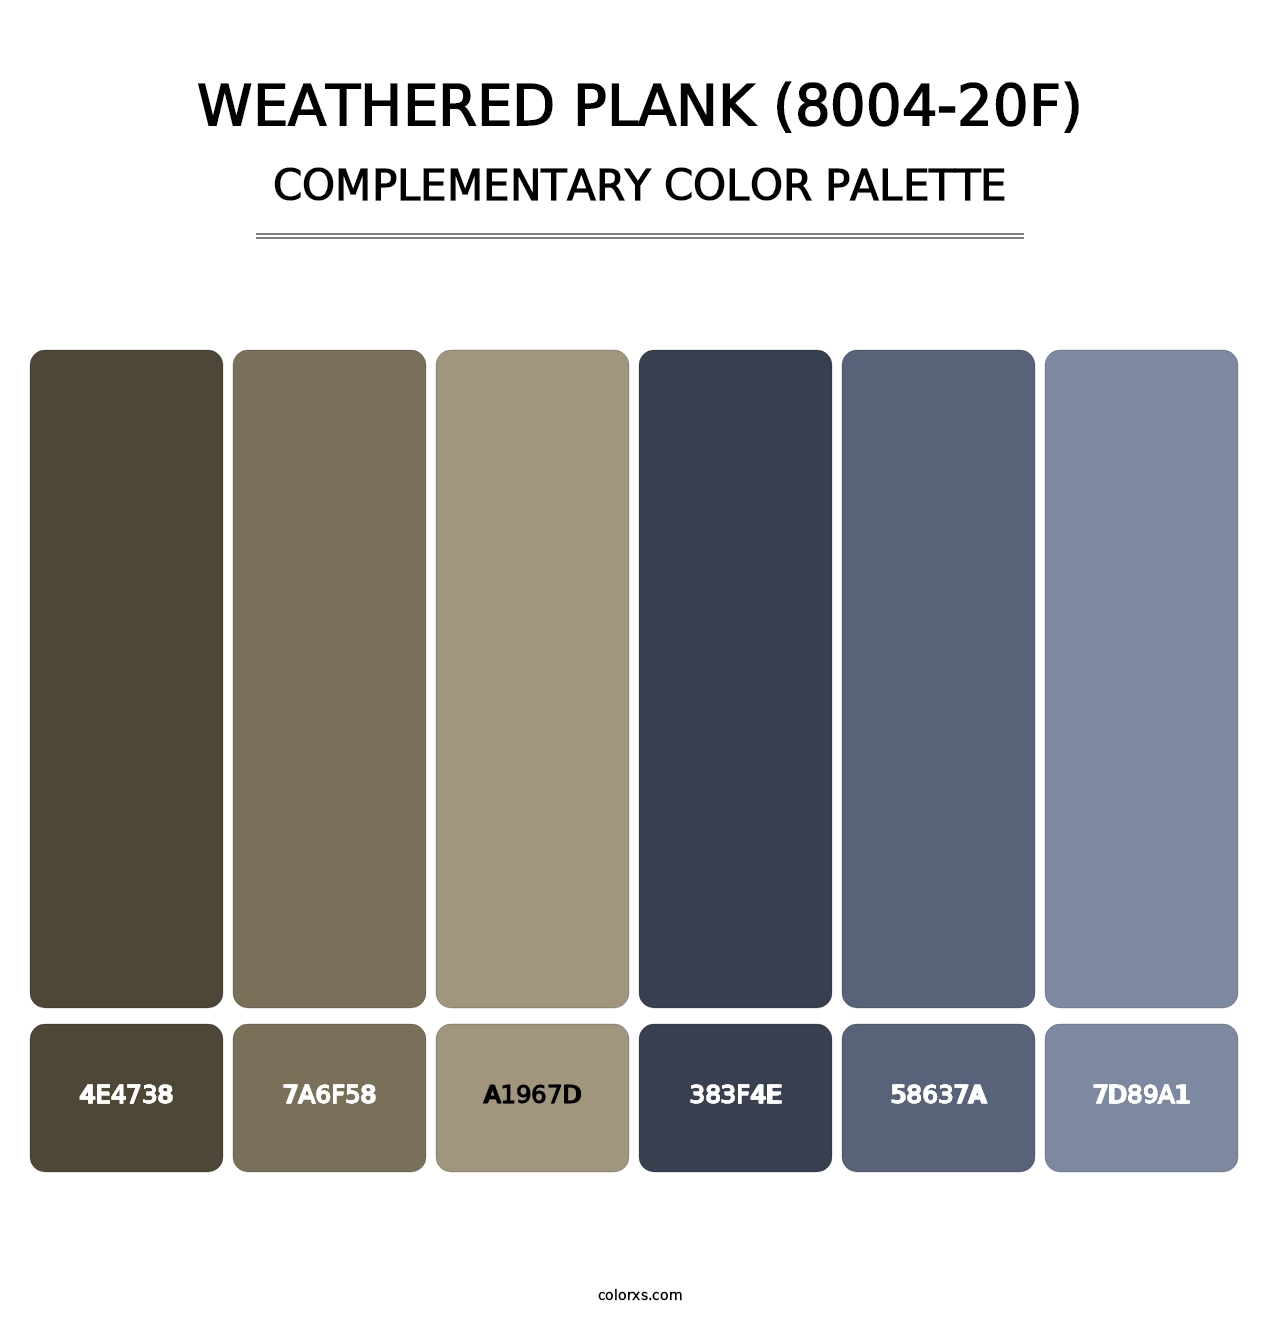 Weathered Plank (8004-20F) - Complementary Color Palette